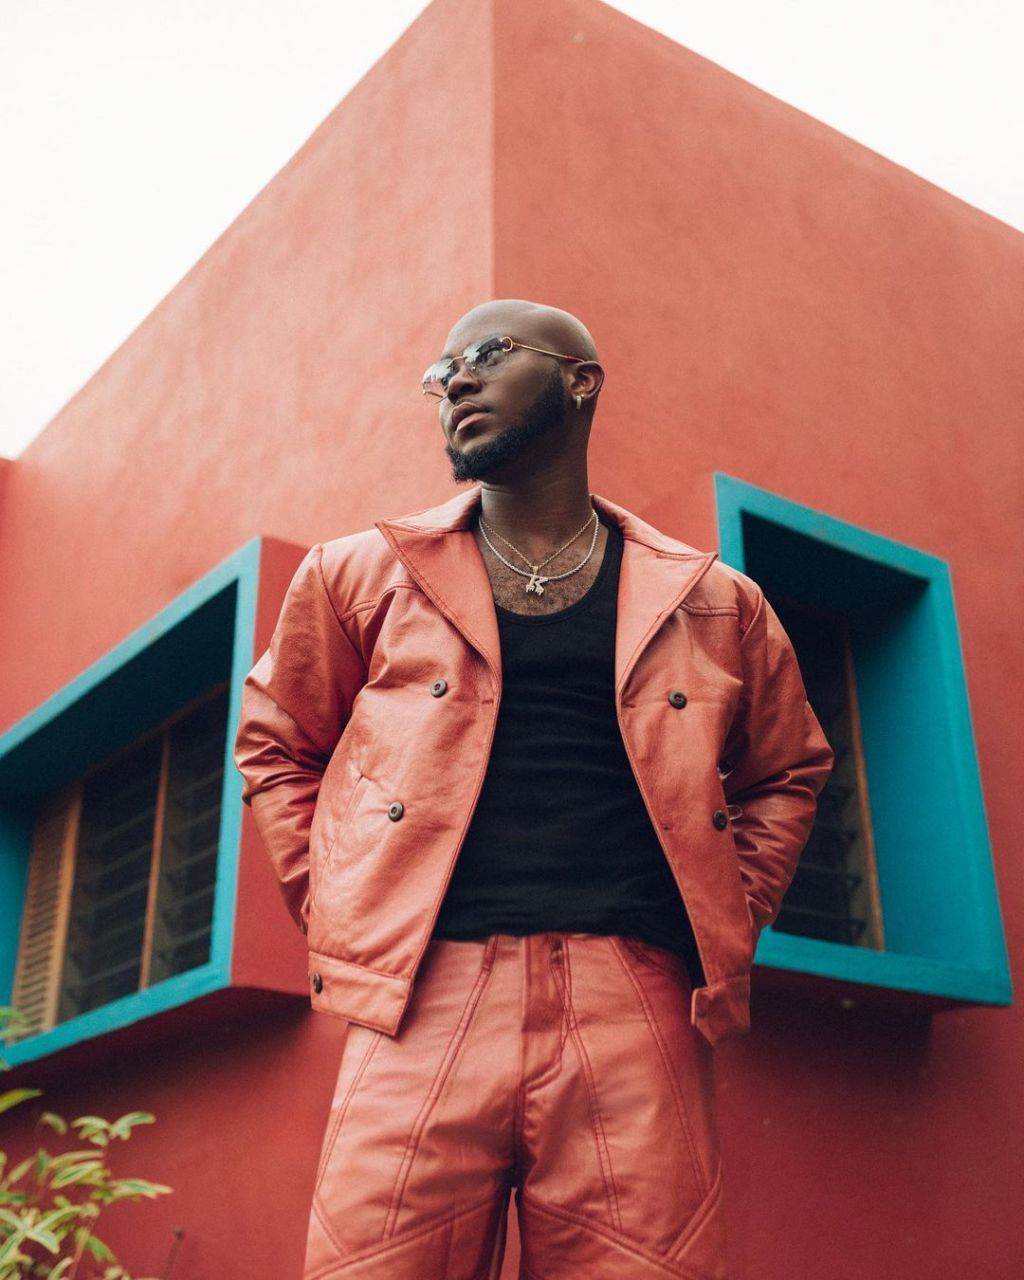 Ring My Line By King Promise F/ Headie One – LISTEN